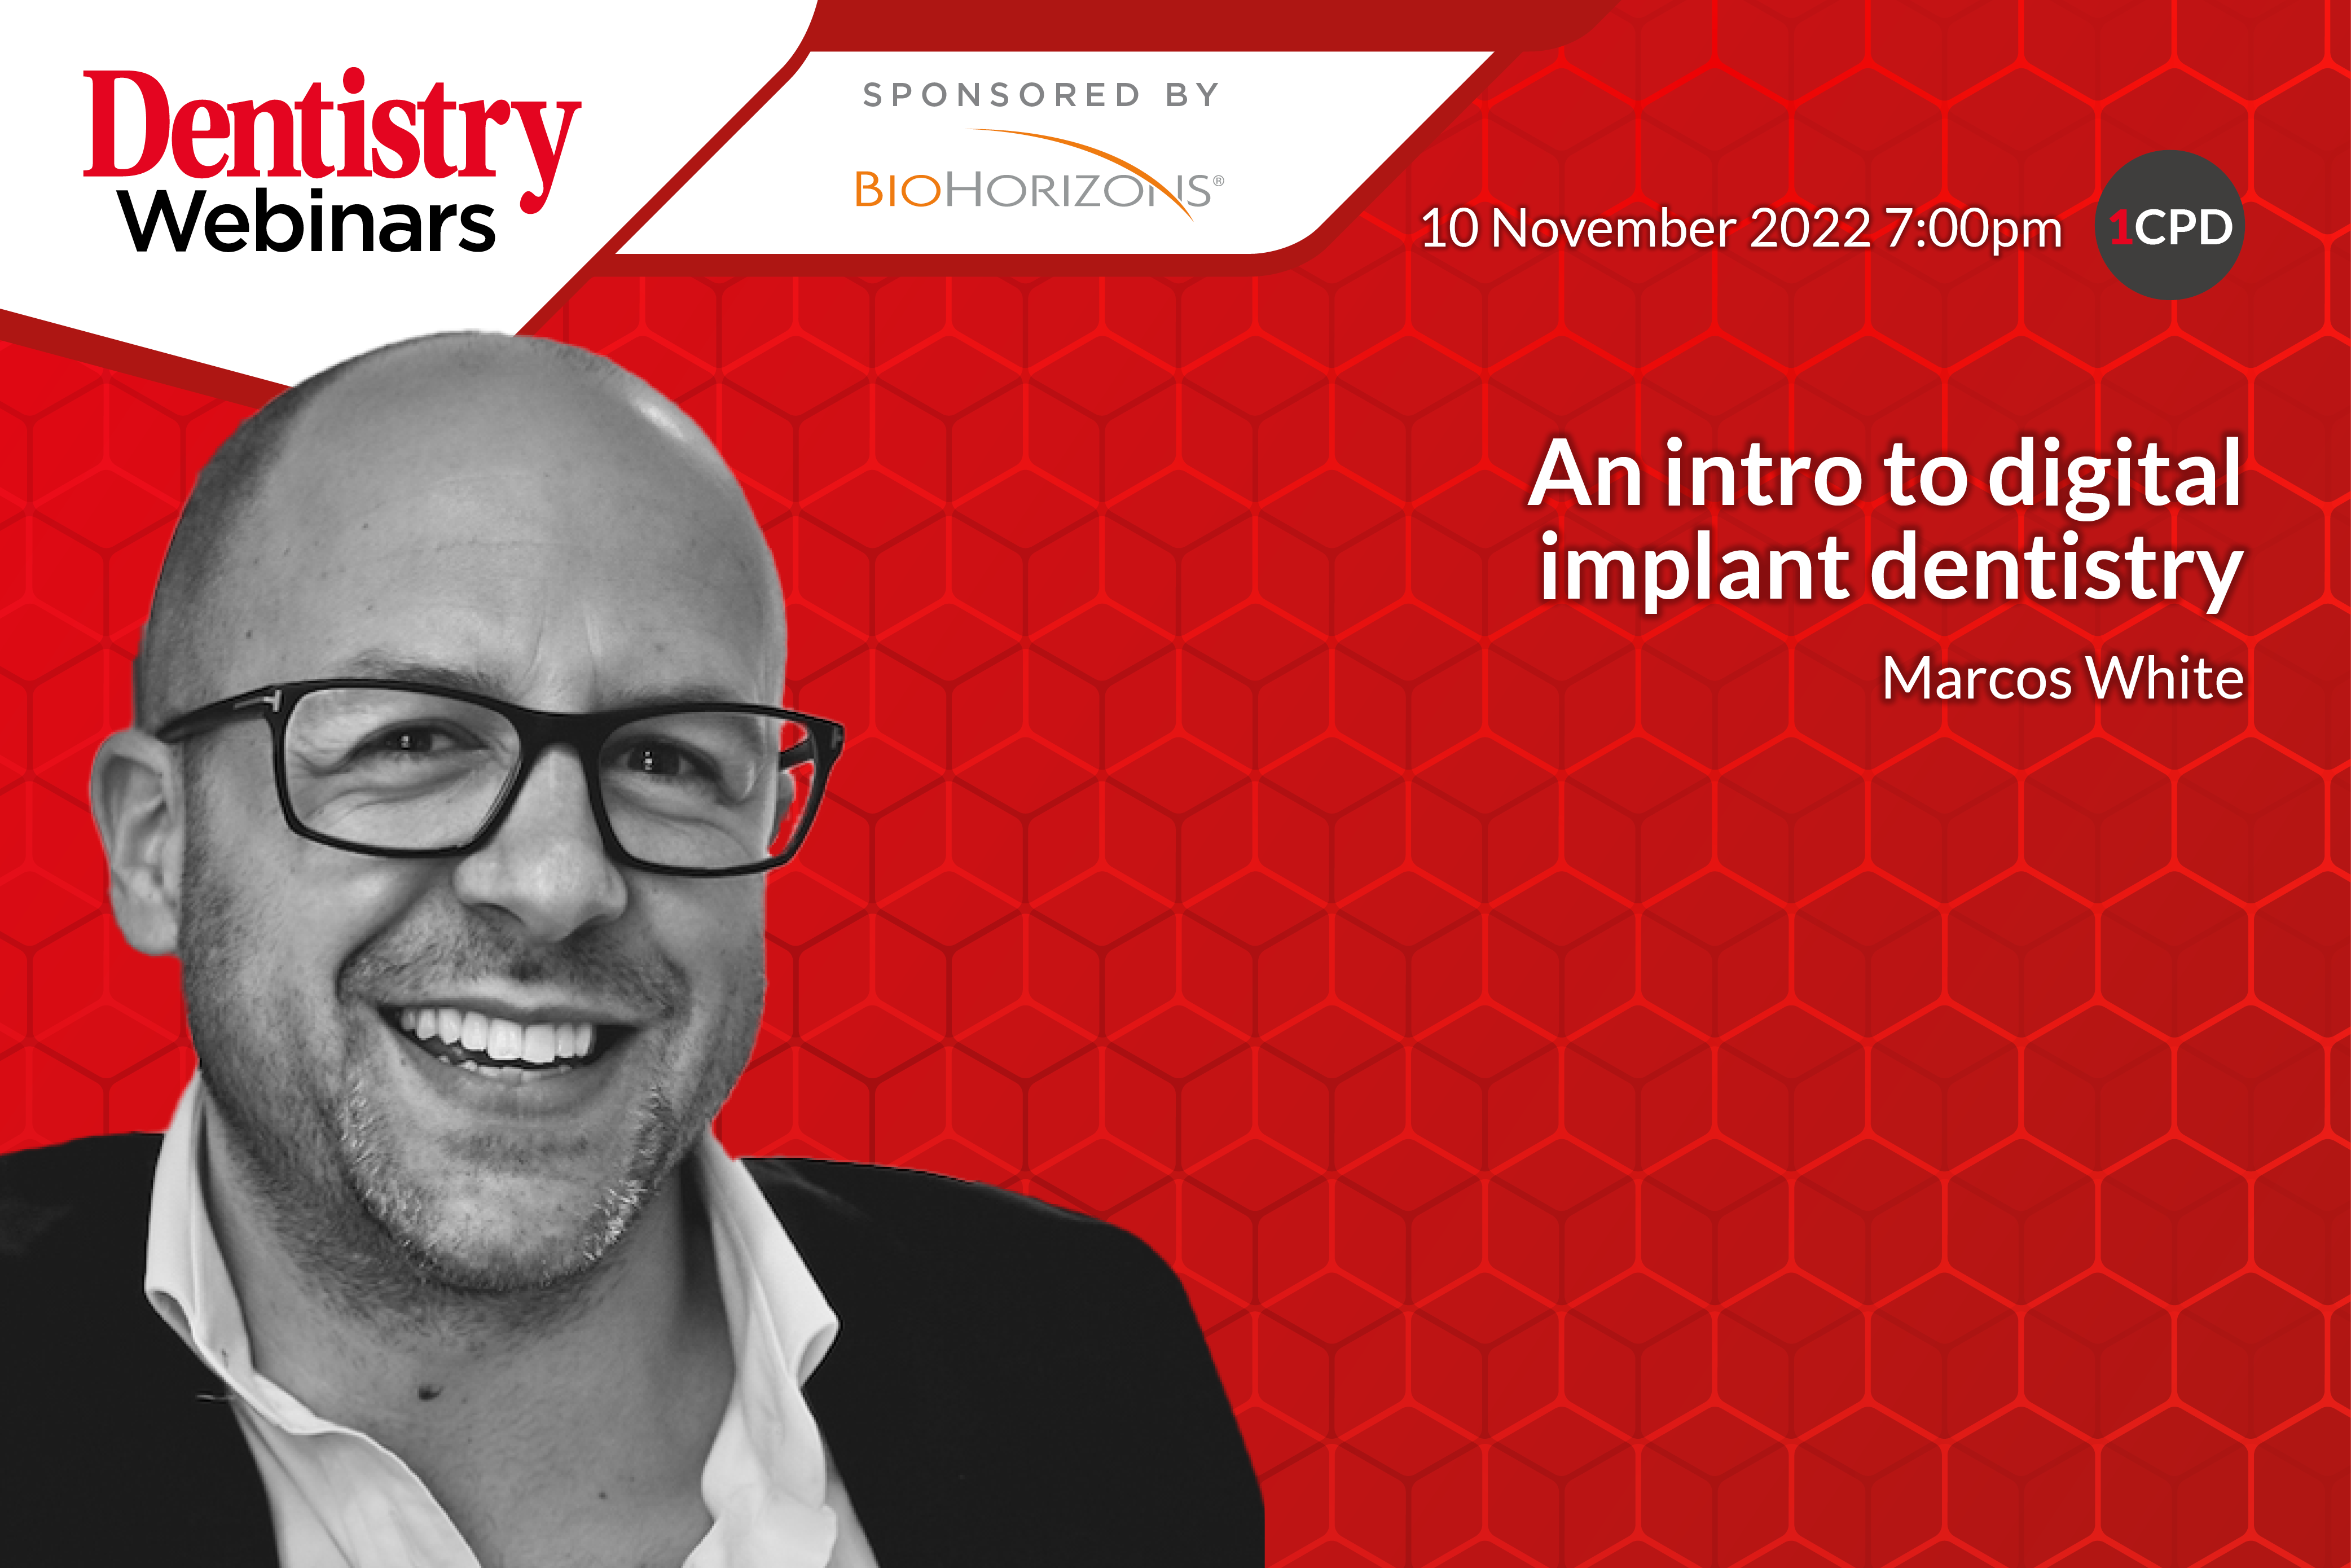 Join Marcos White on Thursday 10 November at 7pm as he discusses an introduction to digital implant dentistry – register now. 